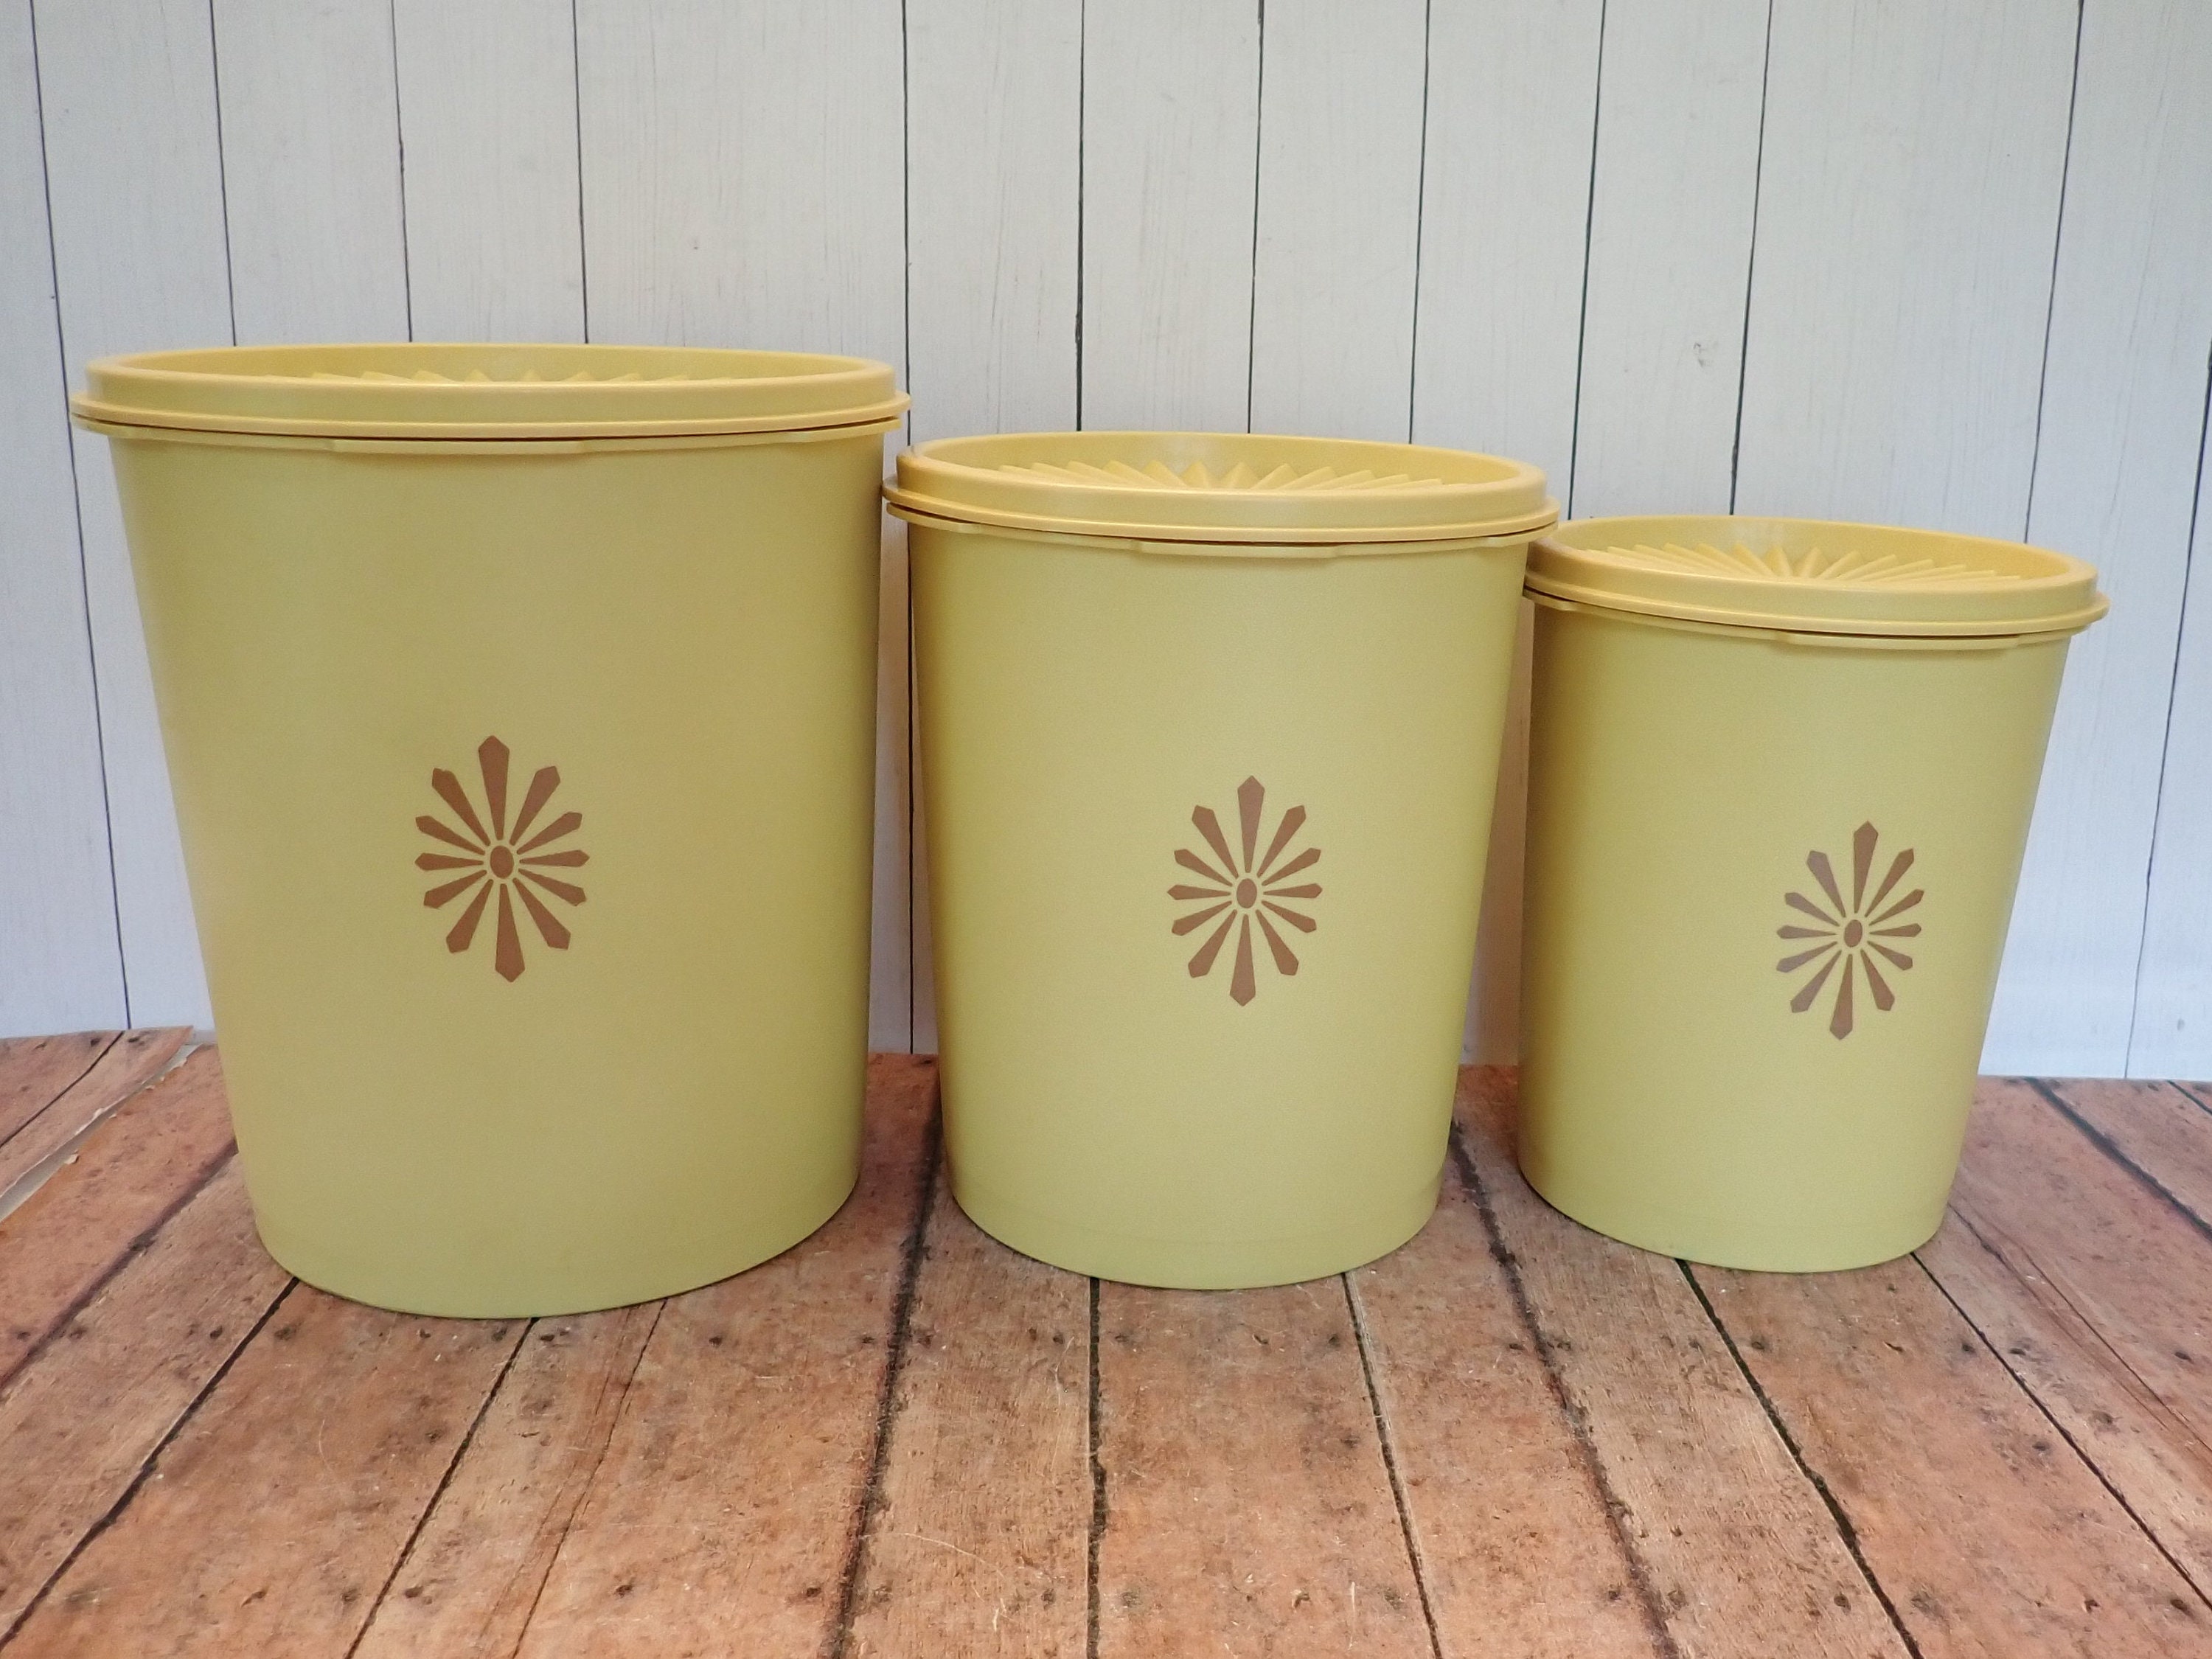 Vintage Tupperware Harvest Servalier Containers, Orange and Yellow  Tupperware, Set of Three Storage Containers, Retro Tupperware, Starburst